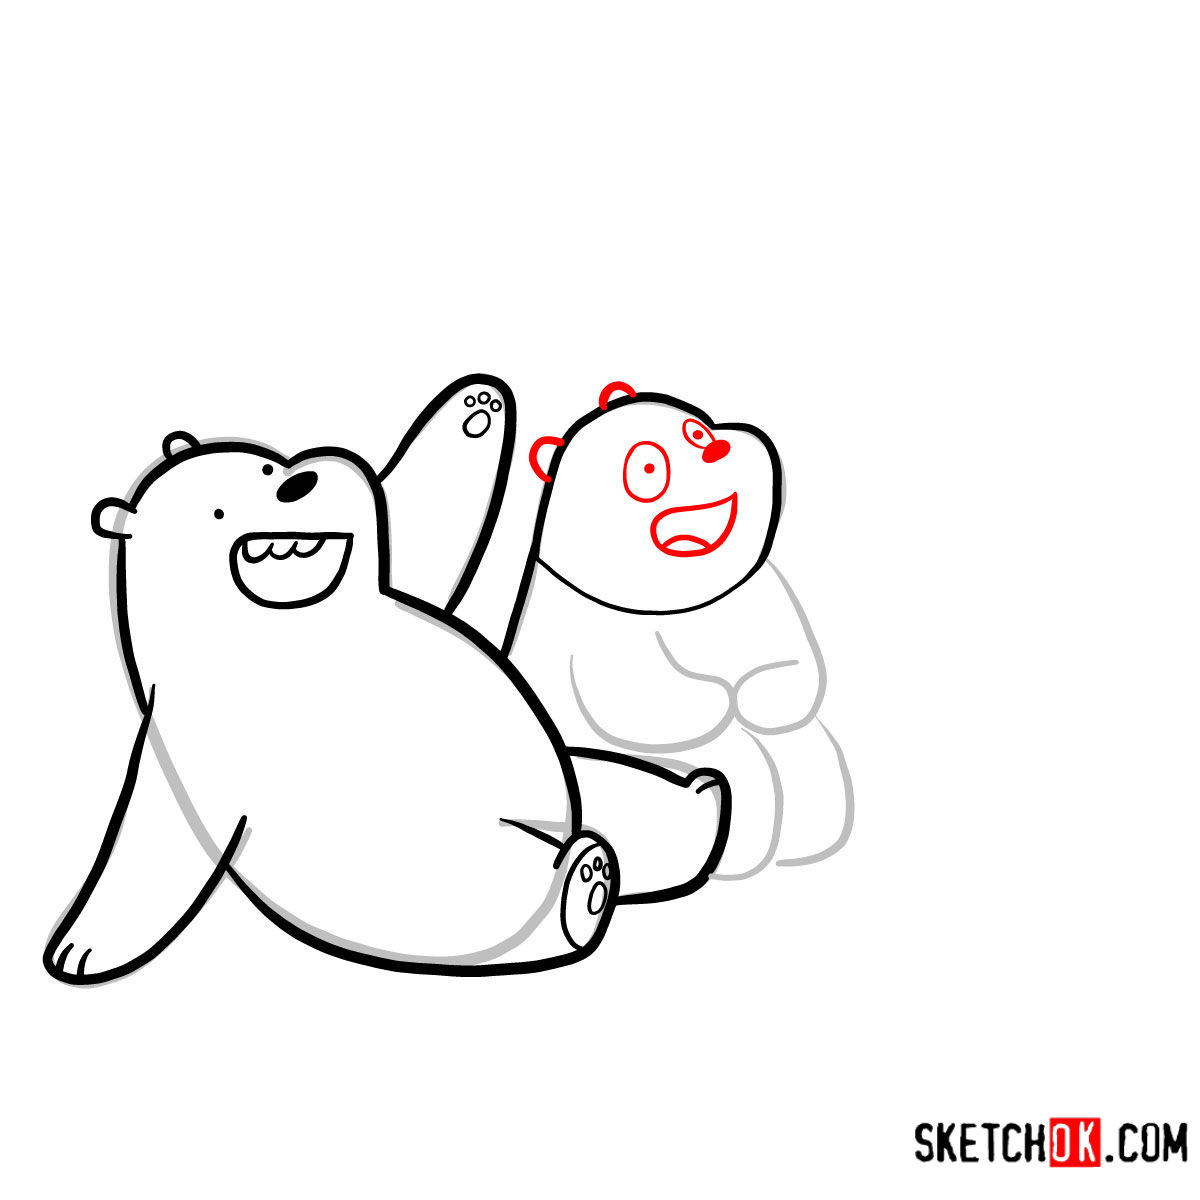 How to draw all three bears together | We Bare Bears - step 10